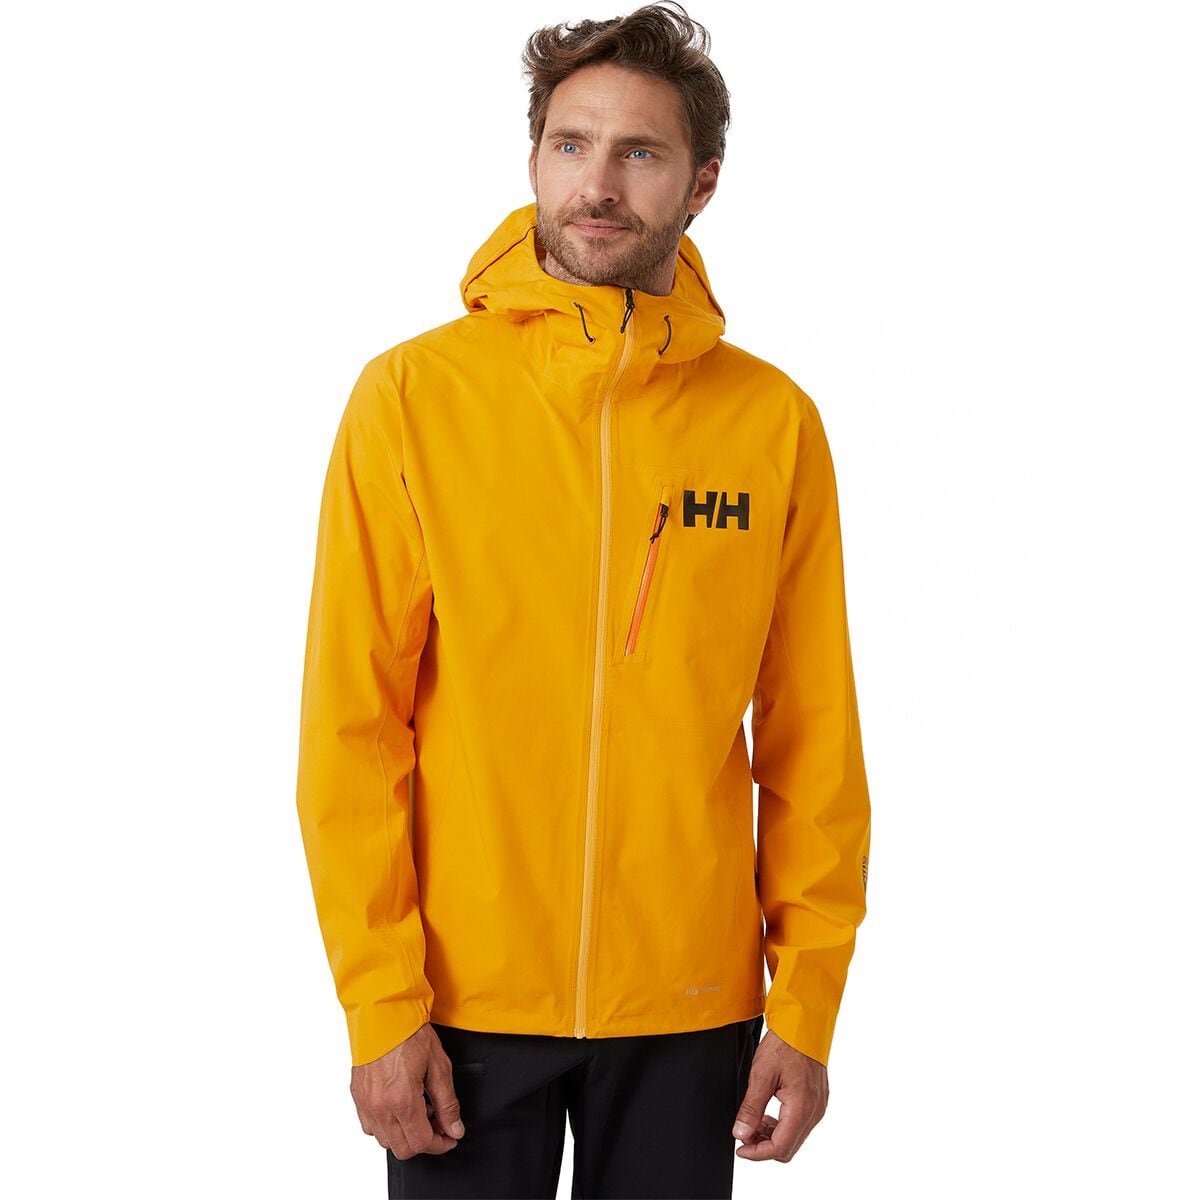 Helly - Jackets, Pants, & More